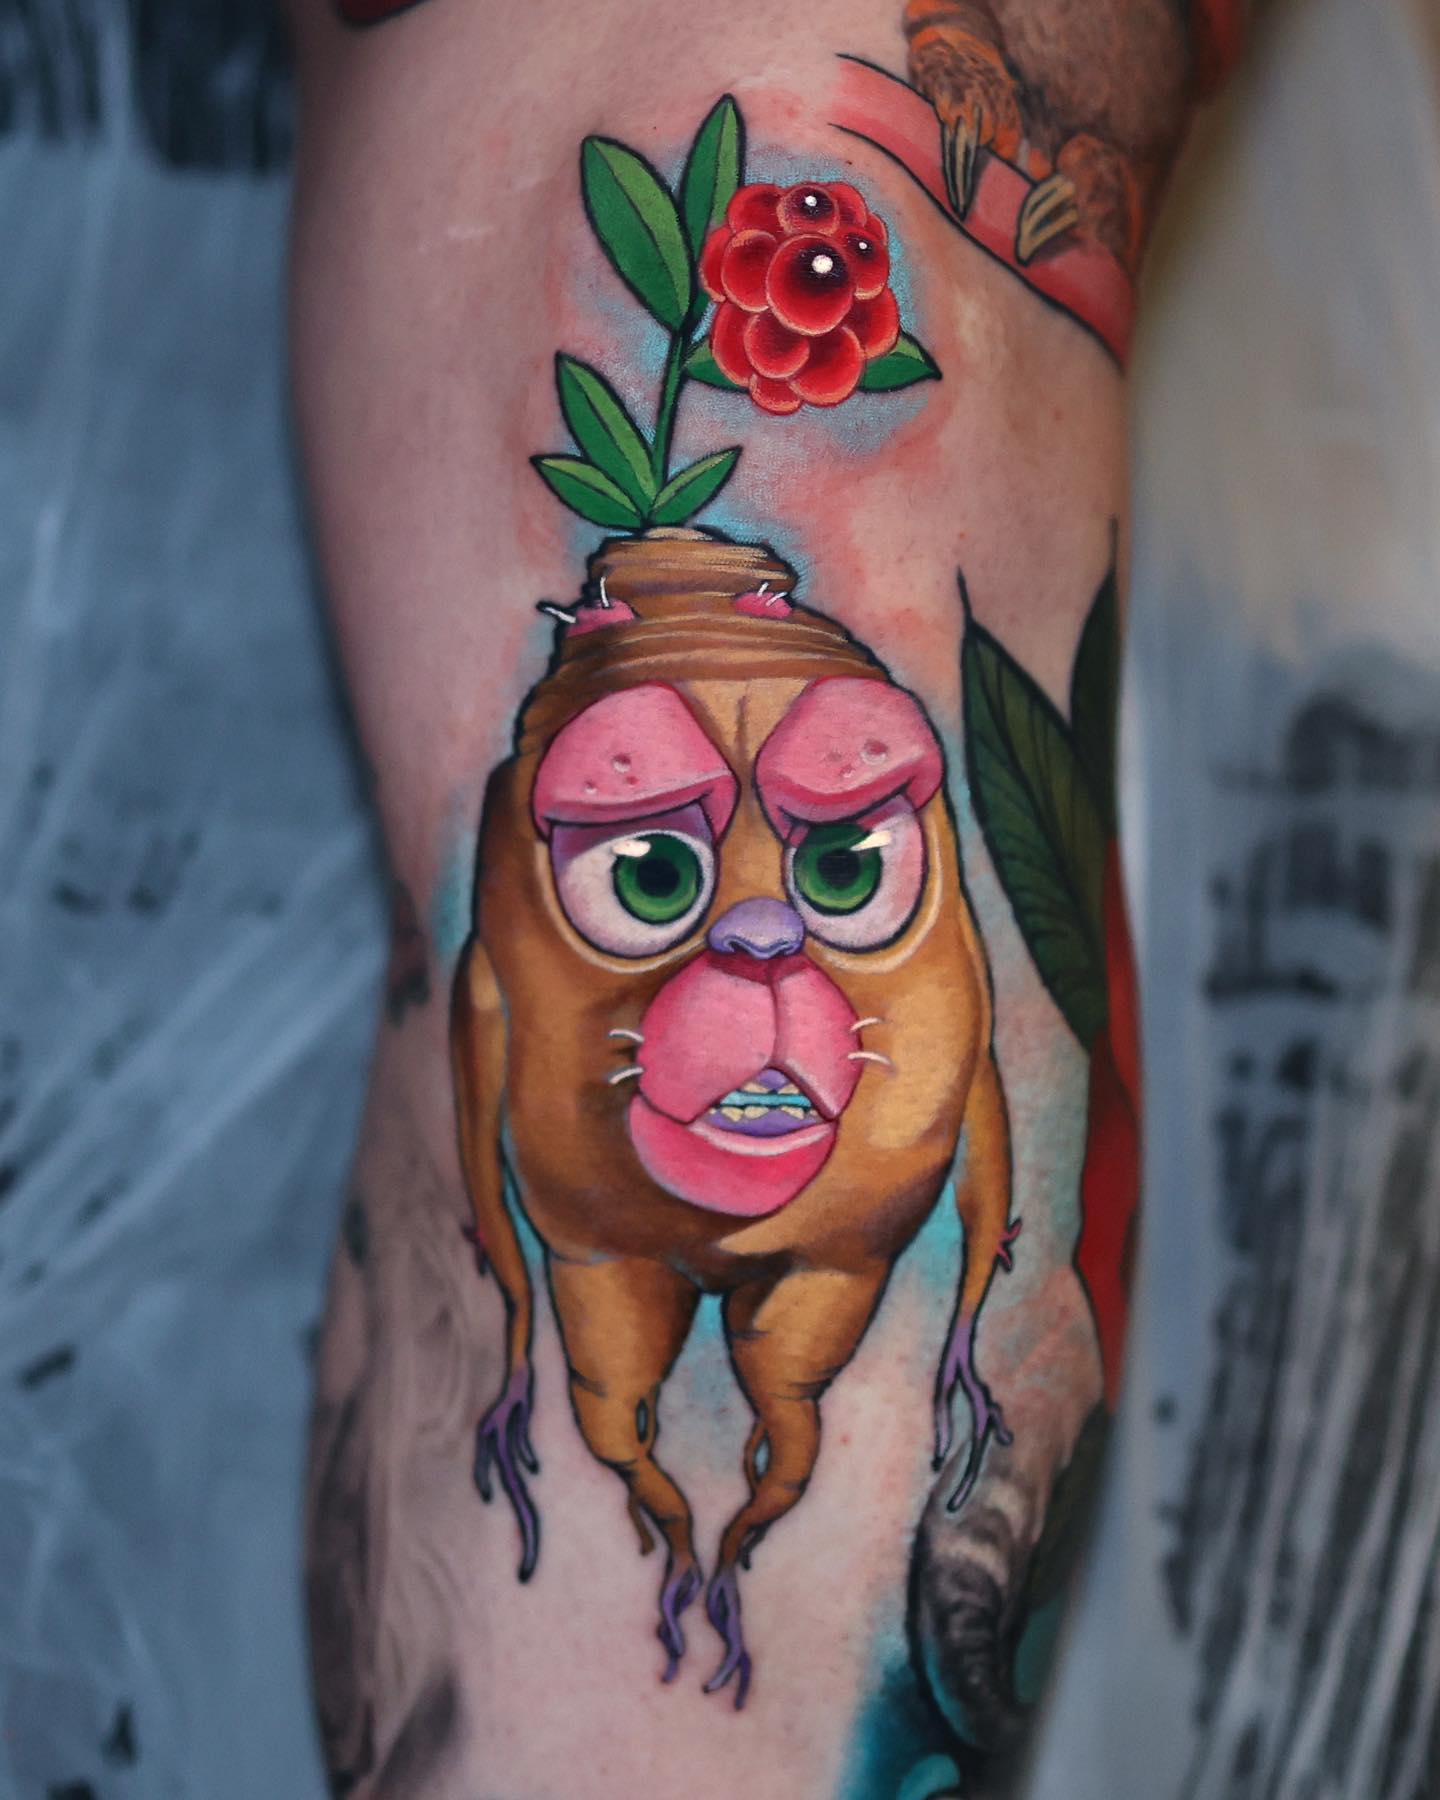 Funny, funky, bright, and quirky, this tattoo is for those who like to watch cartoons still to this day. Heads up since this tattoo can take 5-7 hours to do. It is a giant, precise and colorful tattoo, often worn mostly by those who fully trust and can commit to their tattoo artist.